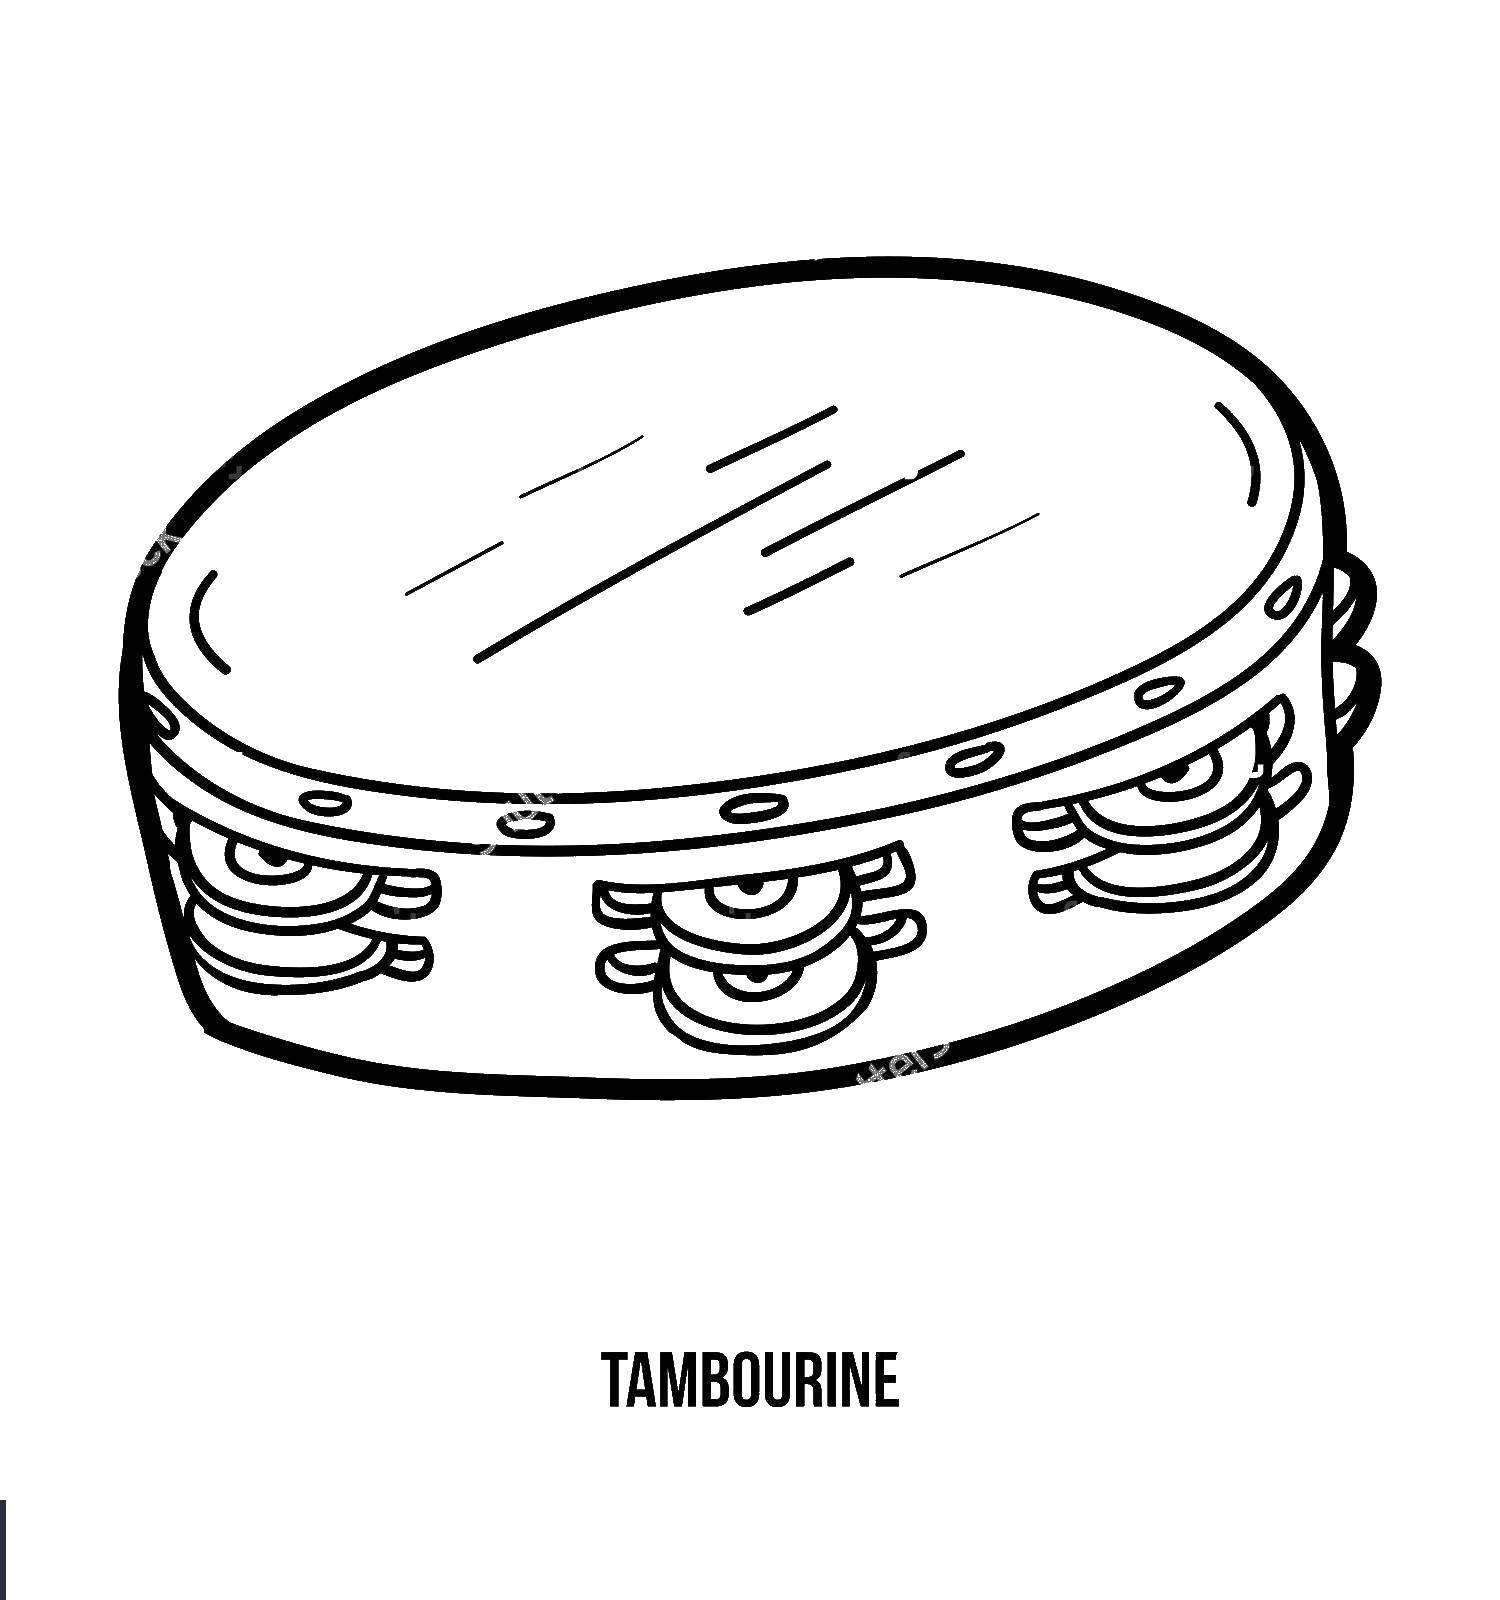 Coloring Tambourine. Category Music. Tags:  Music, instrument, musician, note.